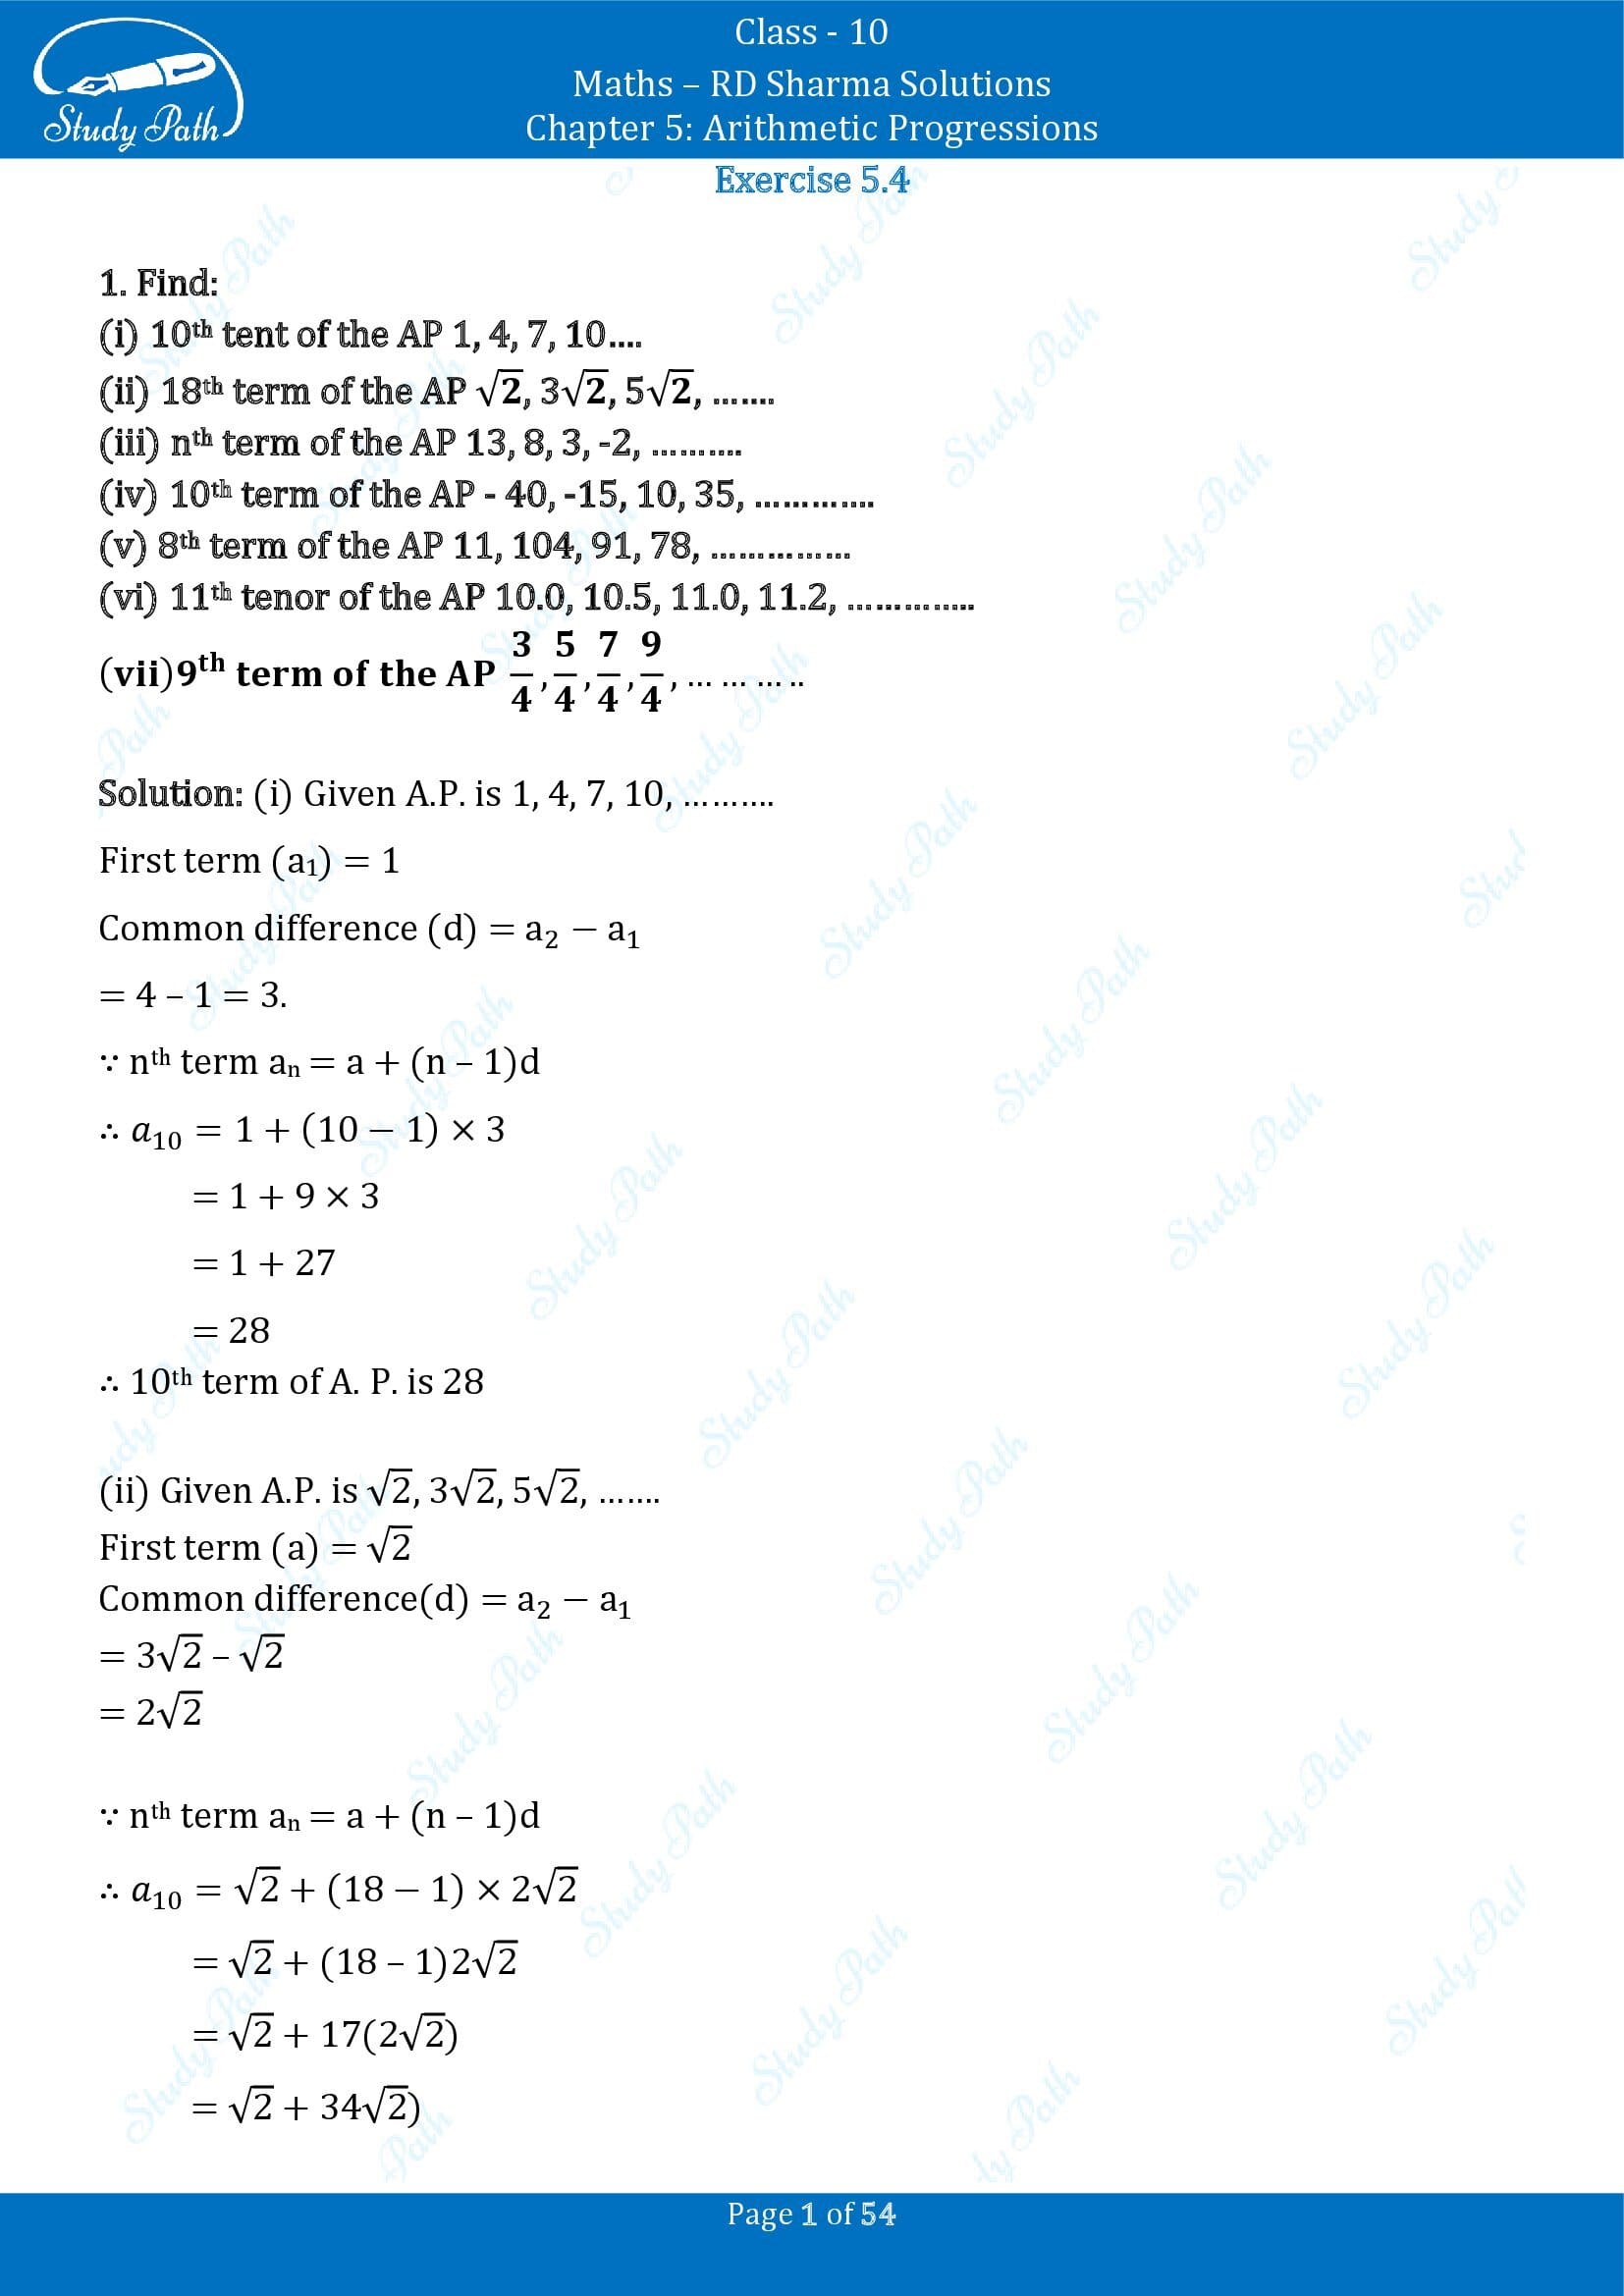 RD Sharma Solutions Class 10 Chapter 5 Arithmetic Progressions Exercise 5.4 00001